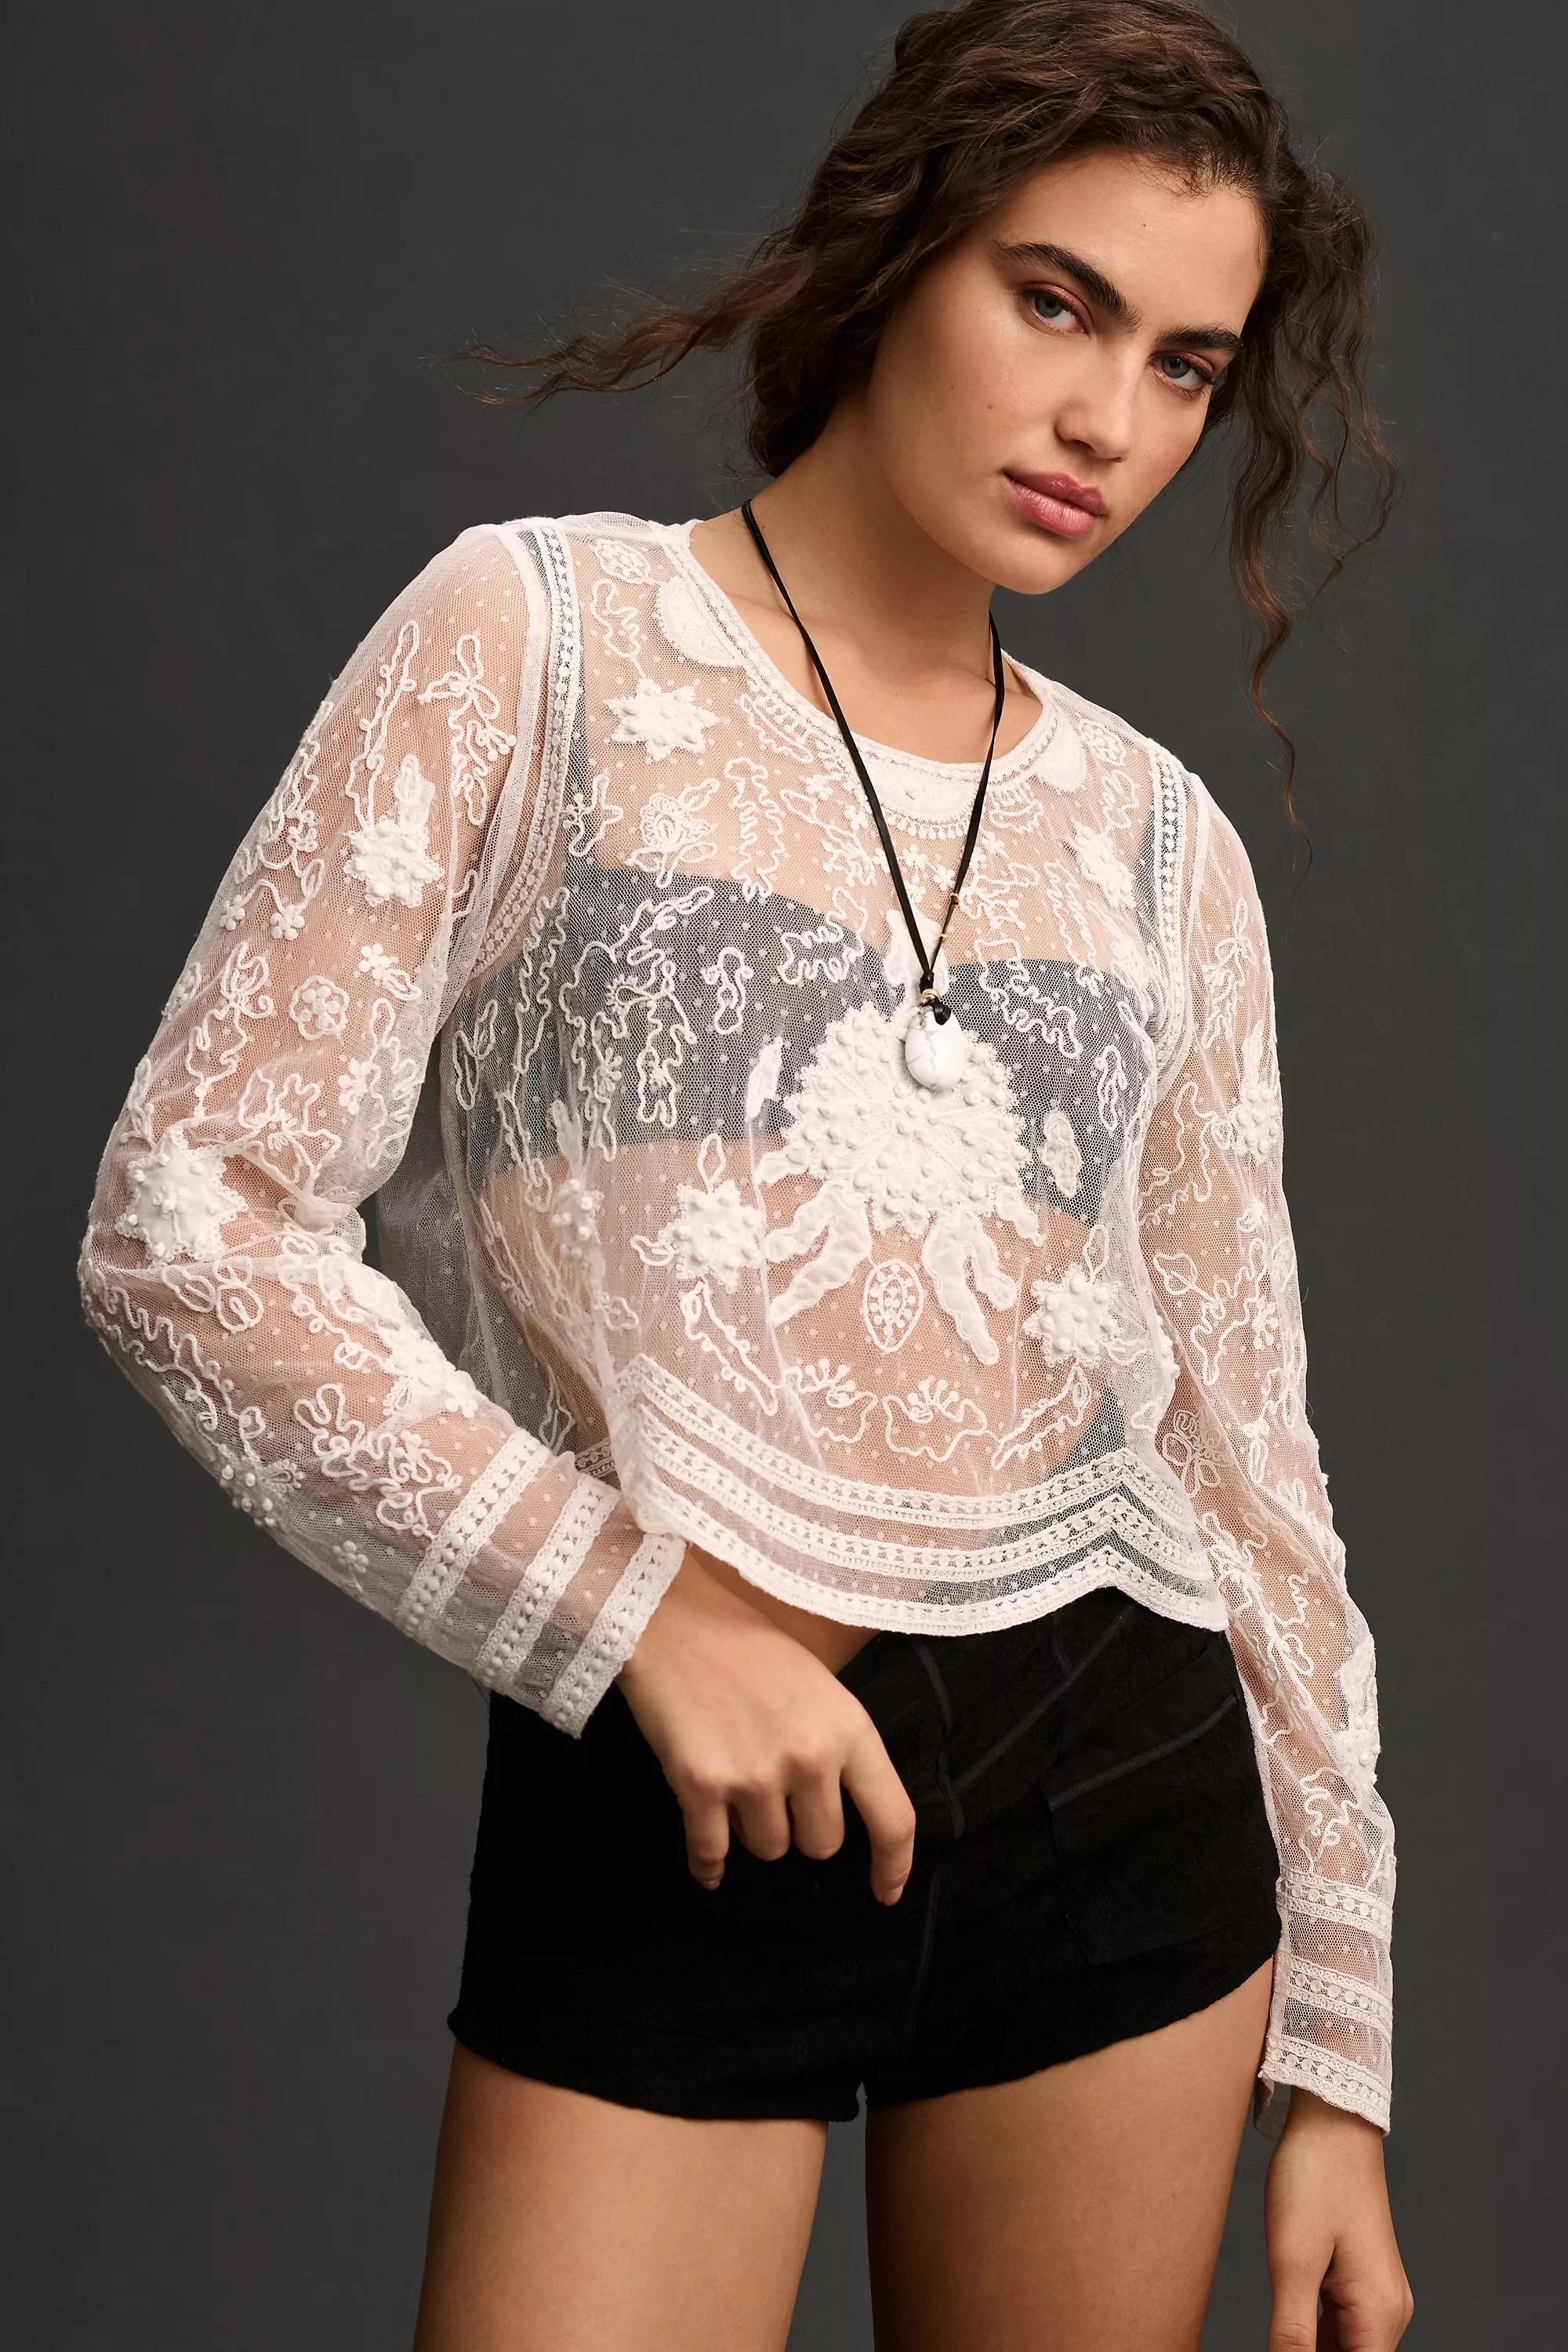 Anthropologie - By Anthropologie Long-Sleeve Mesh Applique Top, White